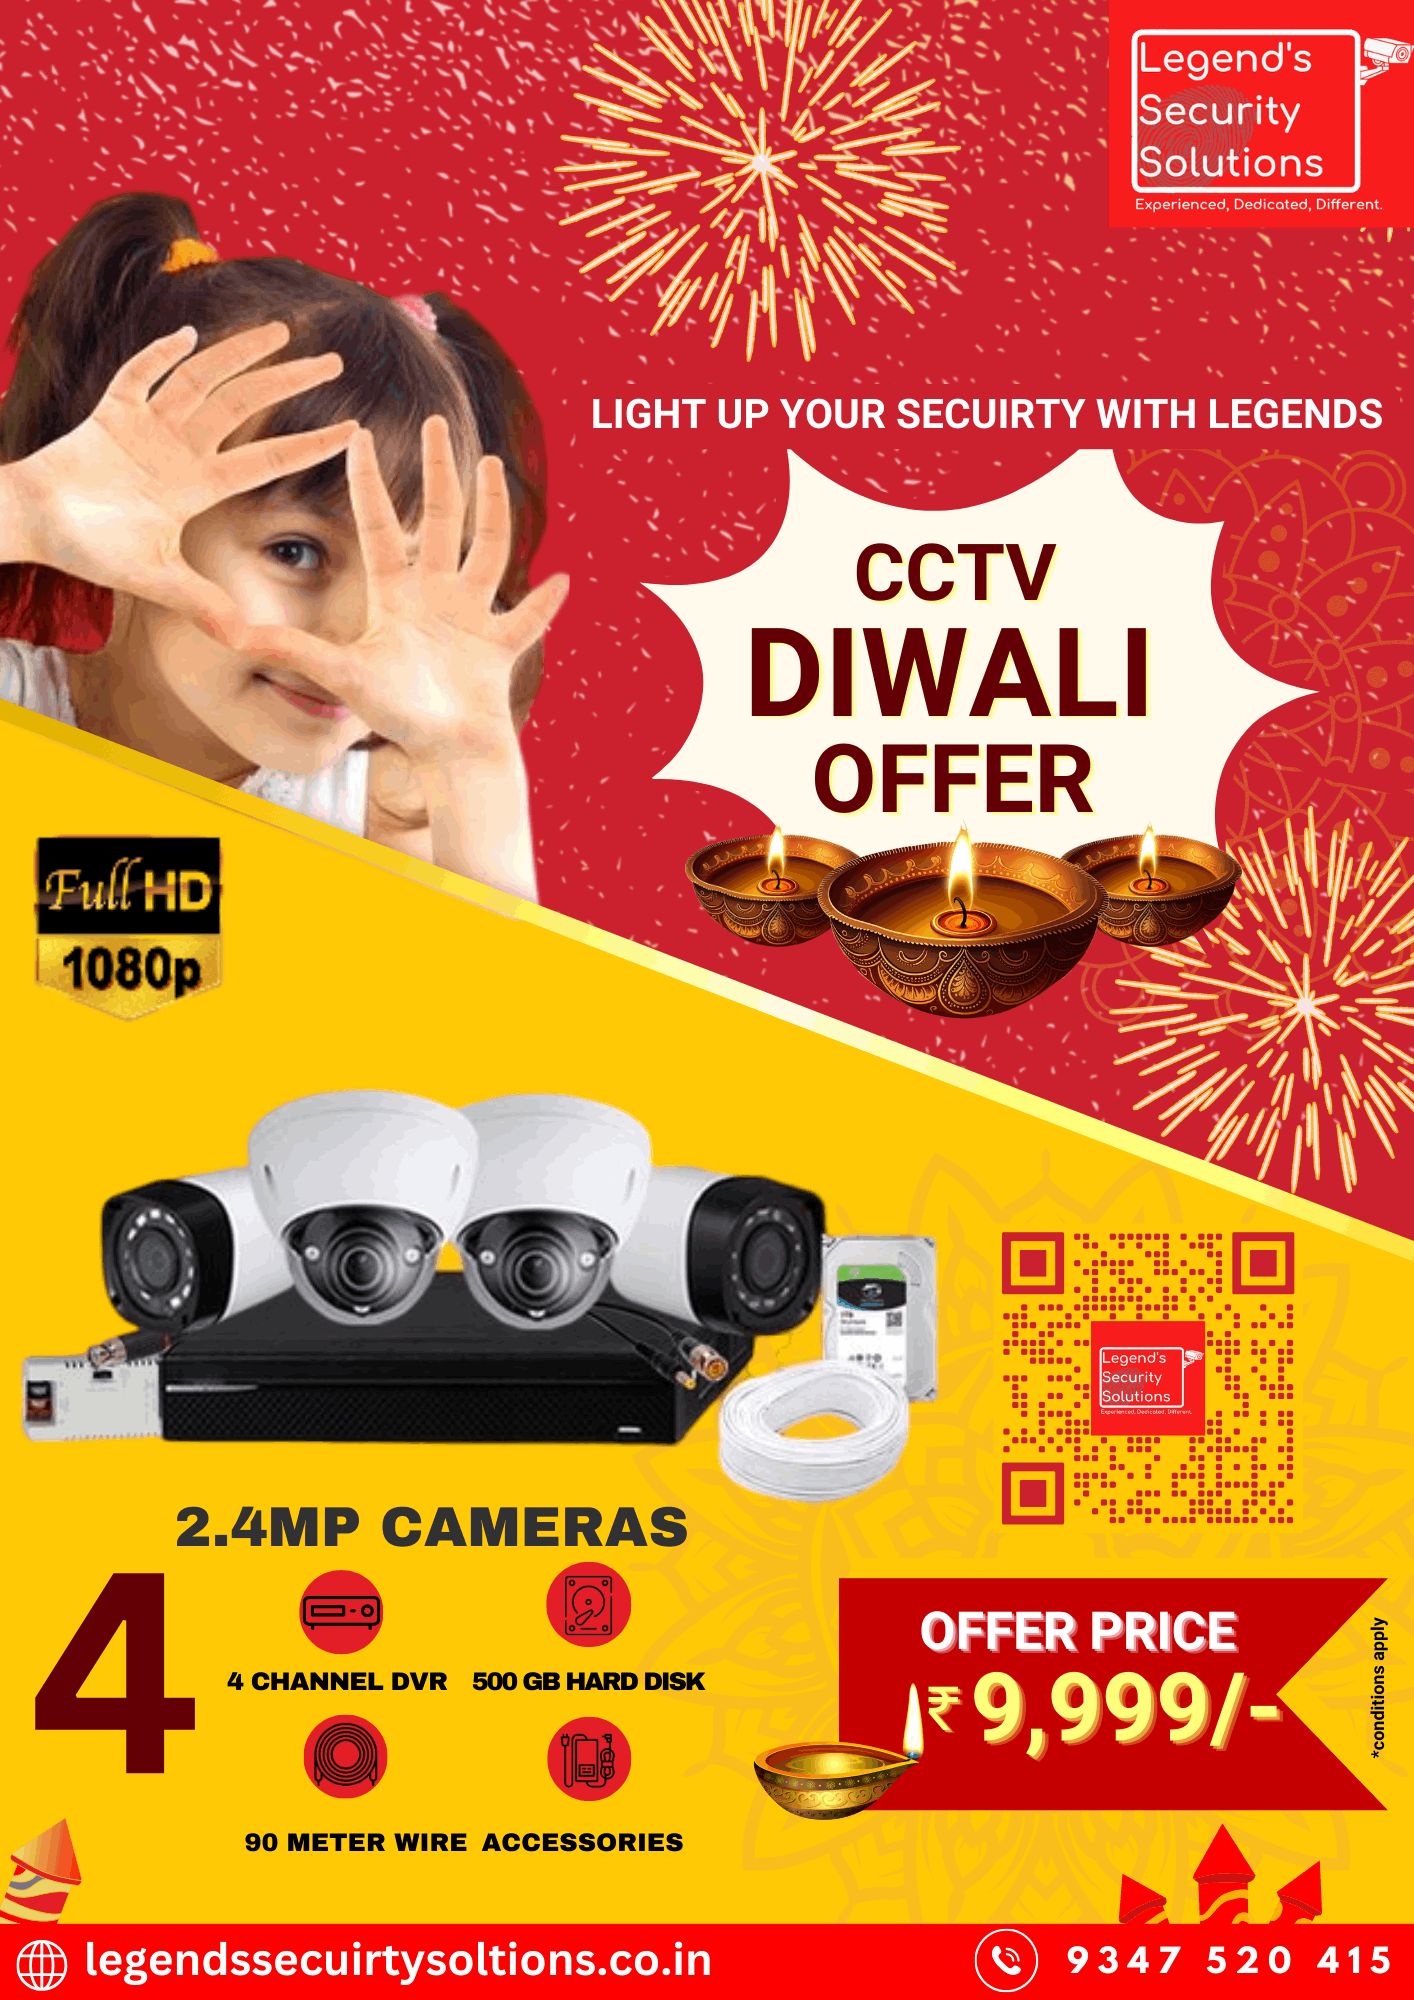 This diwali let's secure your love once